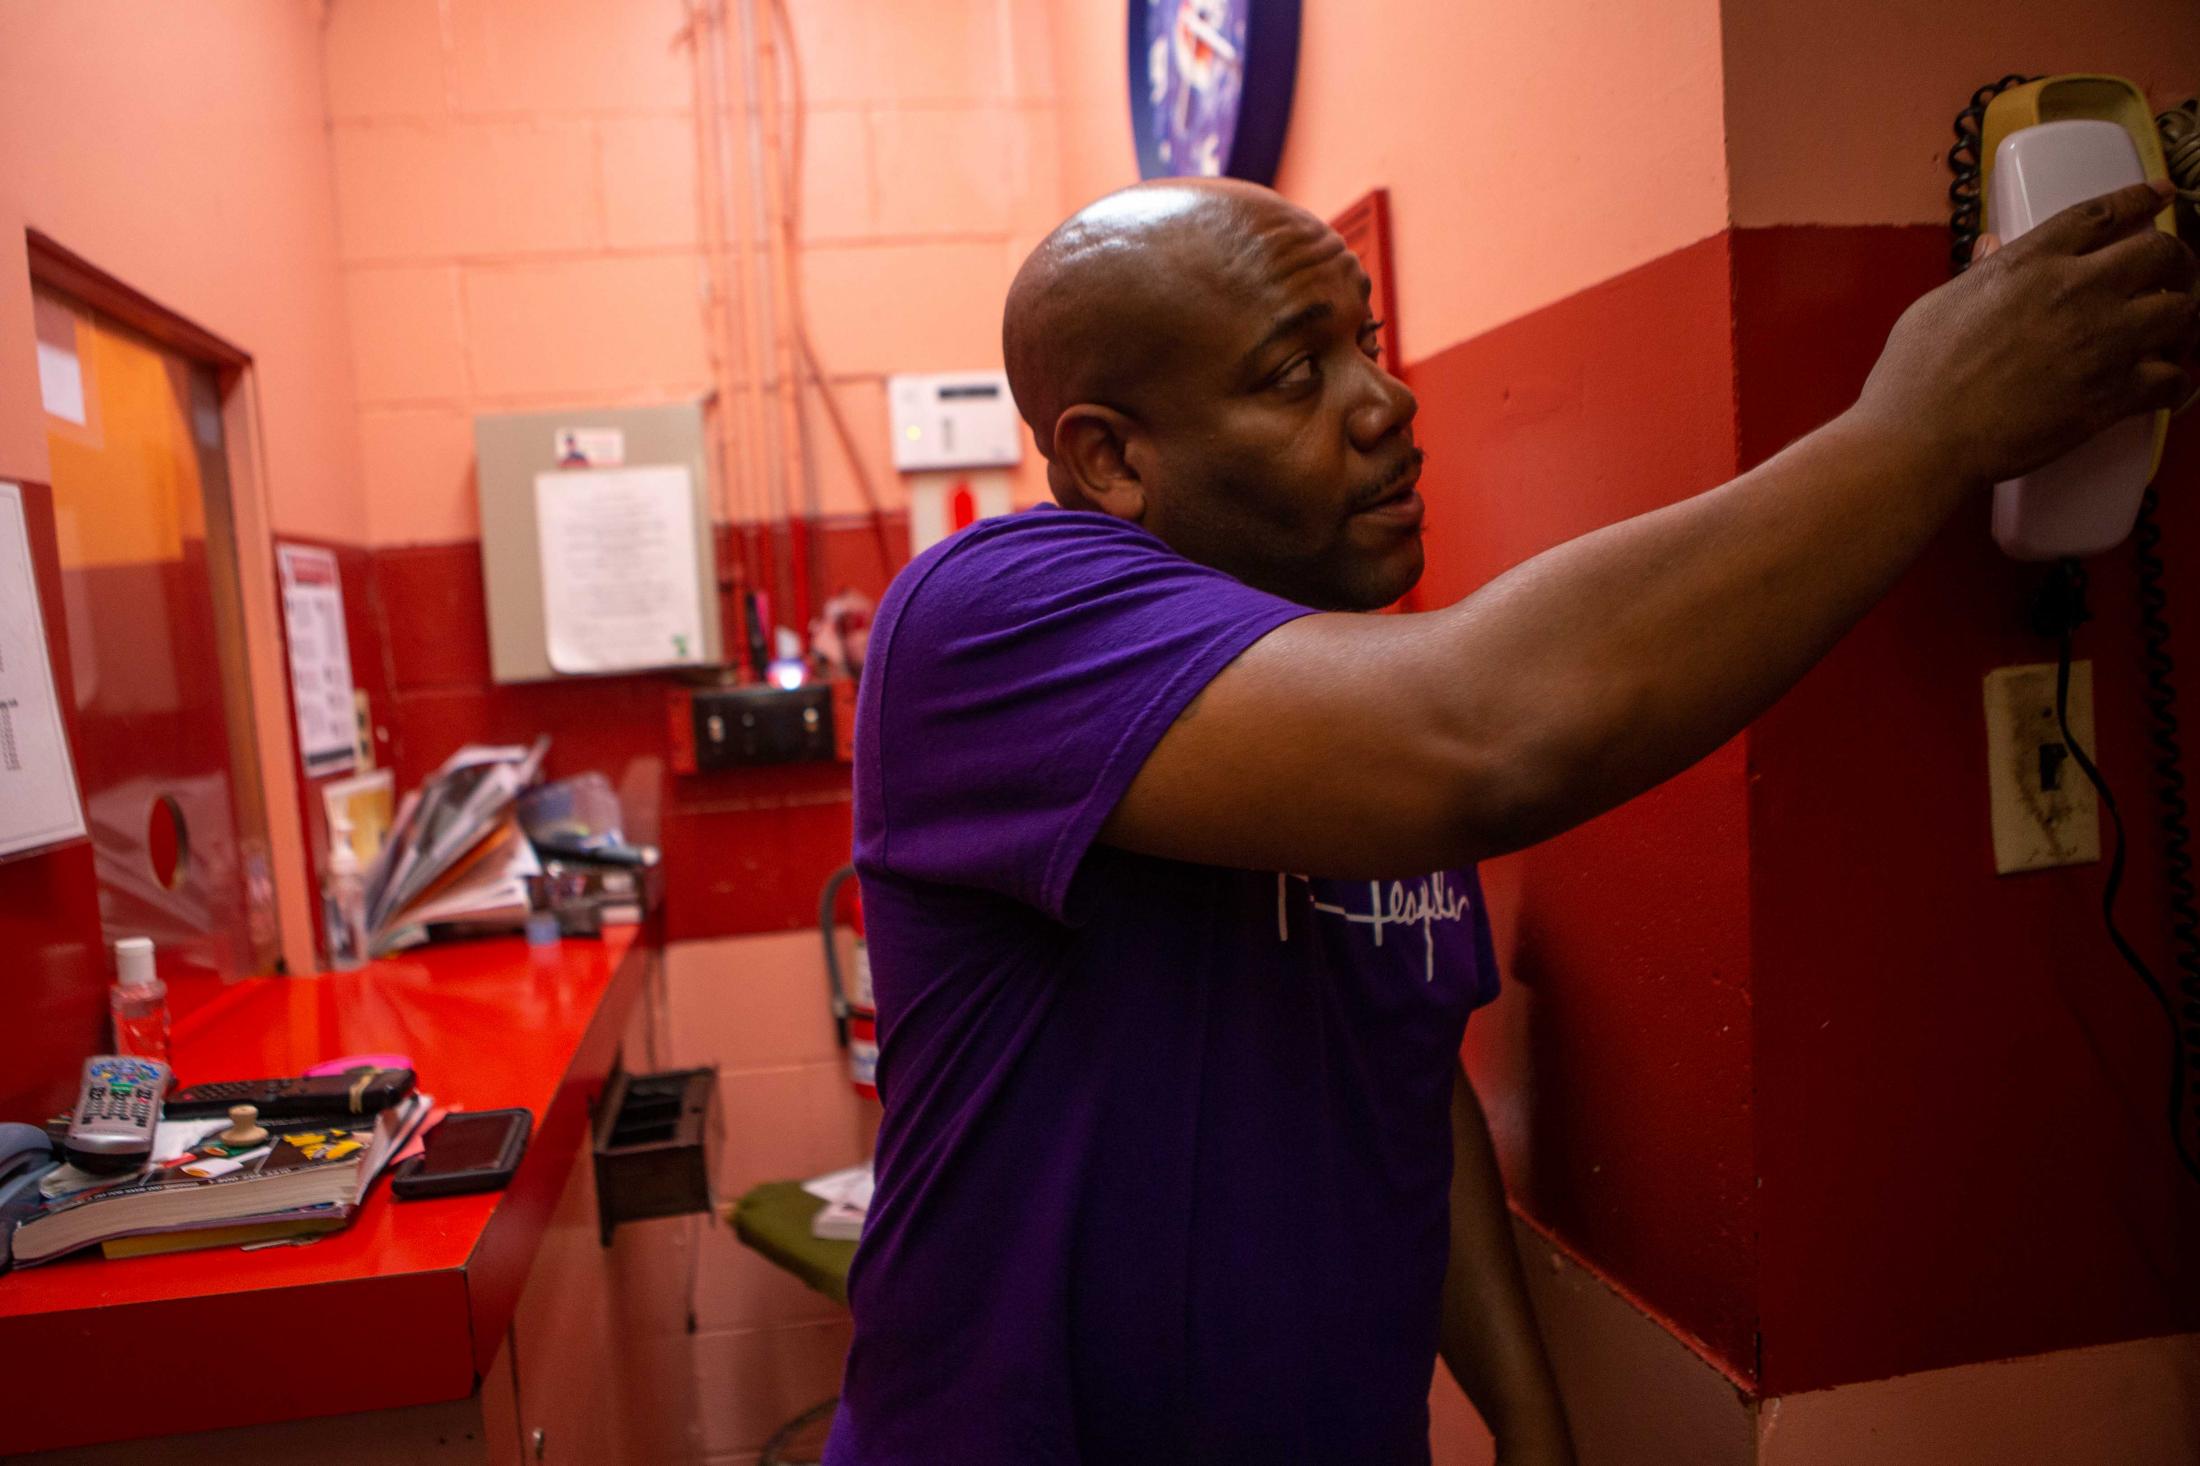 Larry Wise, son of Lawrence Wise, Sr., the owner of Skate City, answers a phone call in between checking in customers at Skate City on Monday, July 12, 2021, in East St. Louis. When not helping out at the skating rink, Larry is a police officer for the Shiloh Police Department in Shiloh, Illinois.